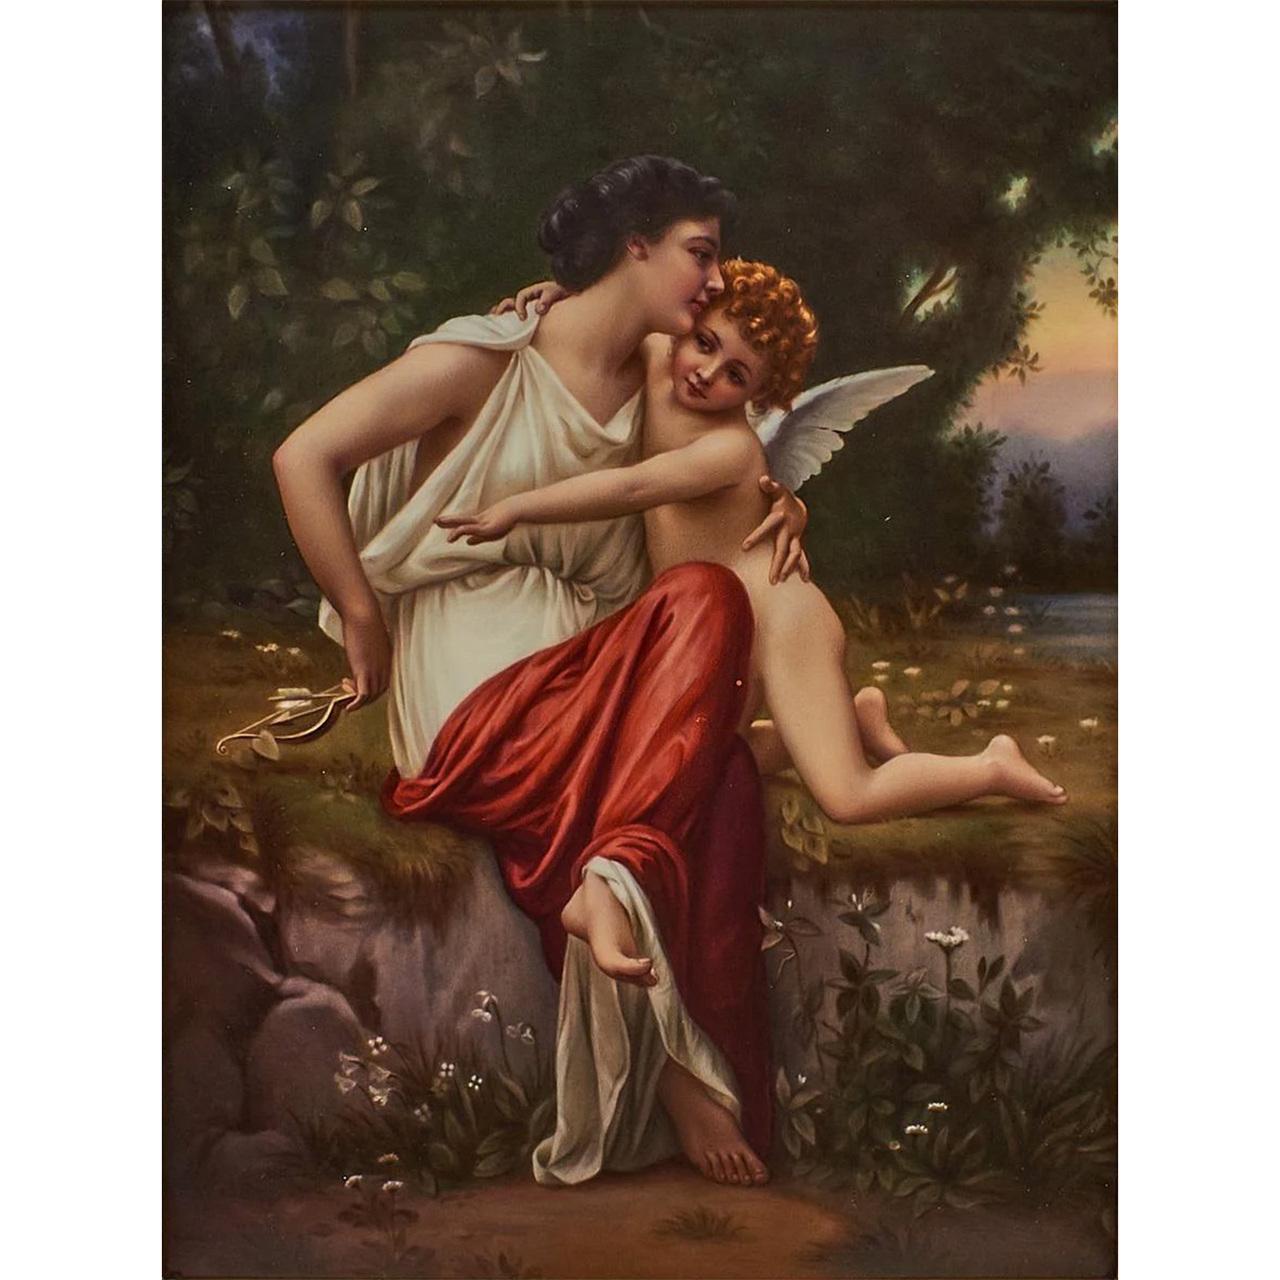 Signed KPM Porcelain plaque of a goddess and Cupid and gilded frame.

Date: 19th century
Origin: Berlin, Germany
Signature: Signed
Dimension: 10.25 in. x 7.75 in.